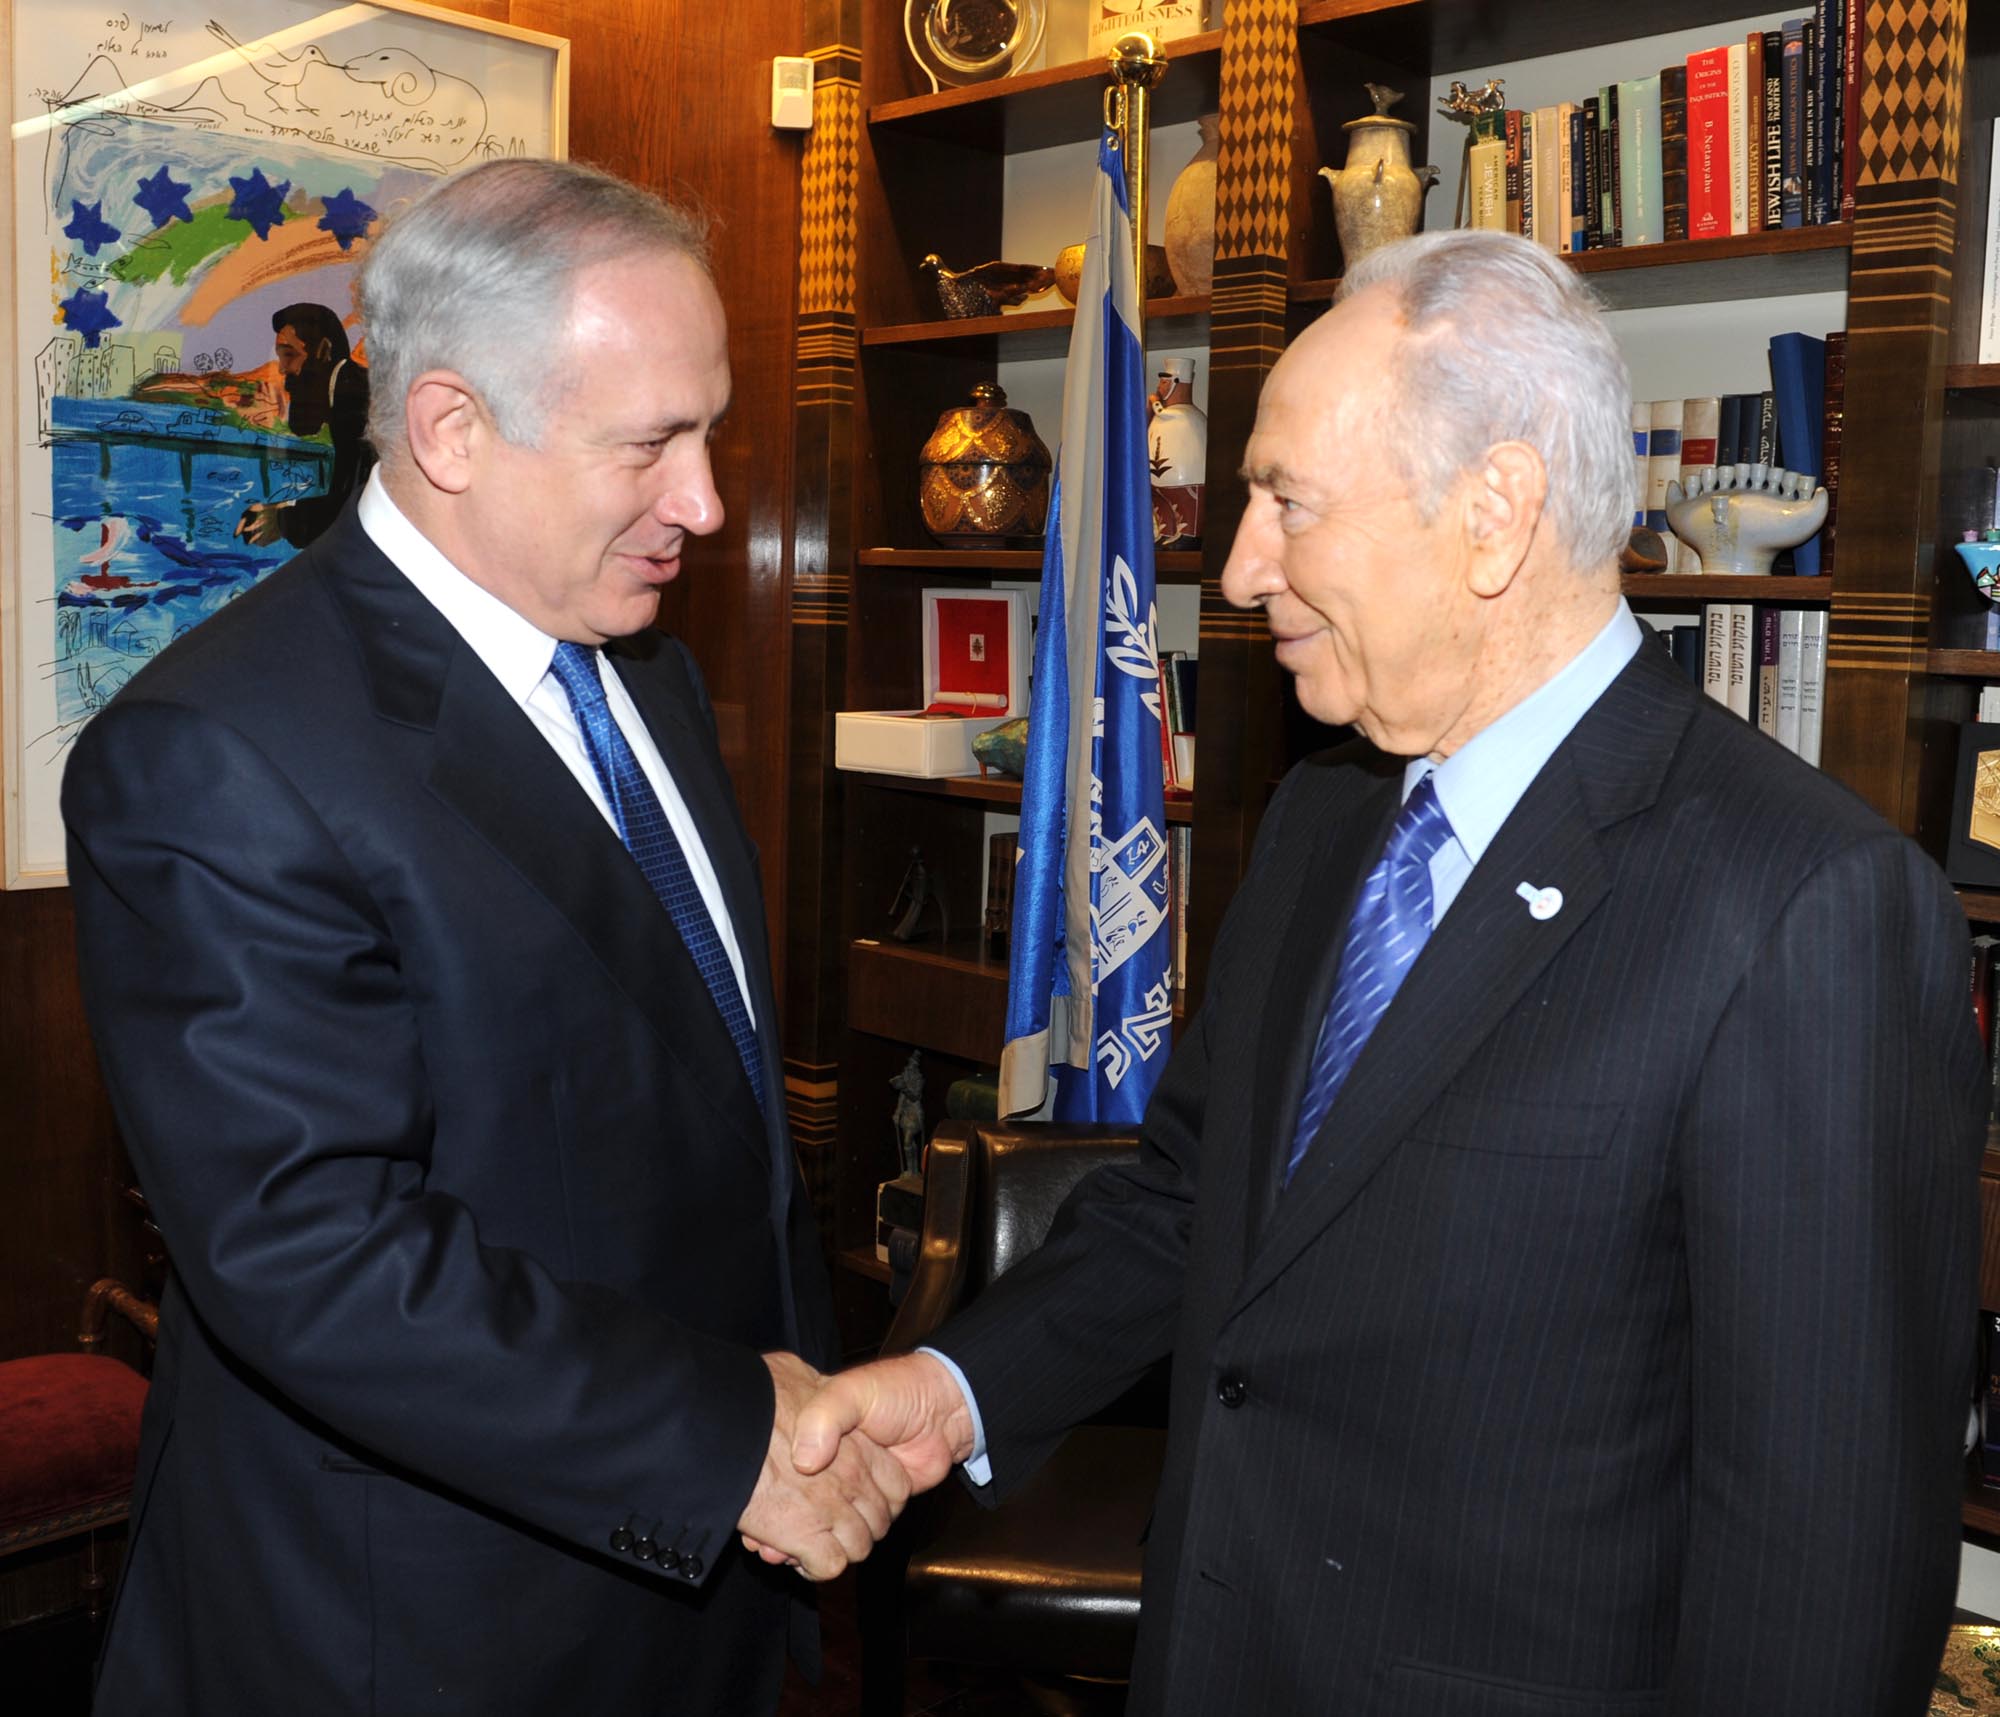 Moshe Milner/GPO via Getty Images. Benjamin Netanyahu has been chosen to form a ruling coalition